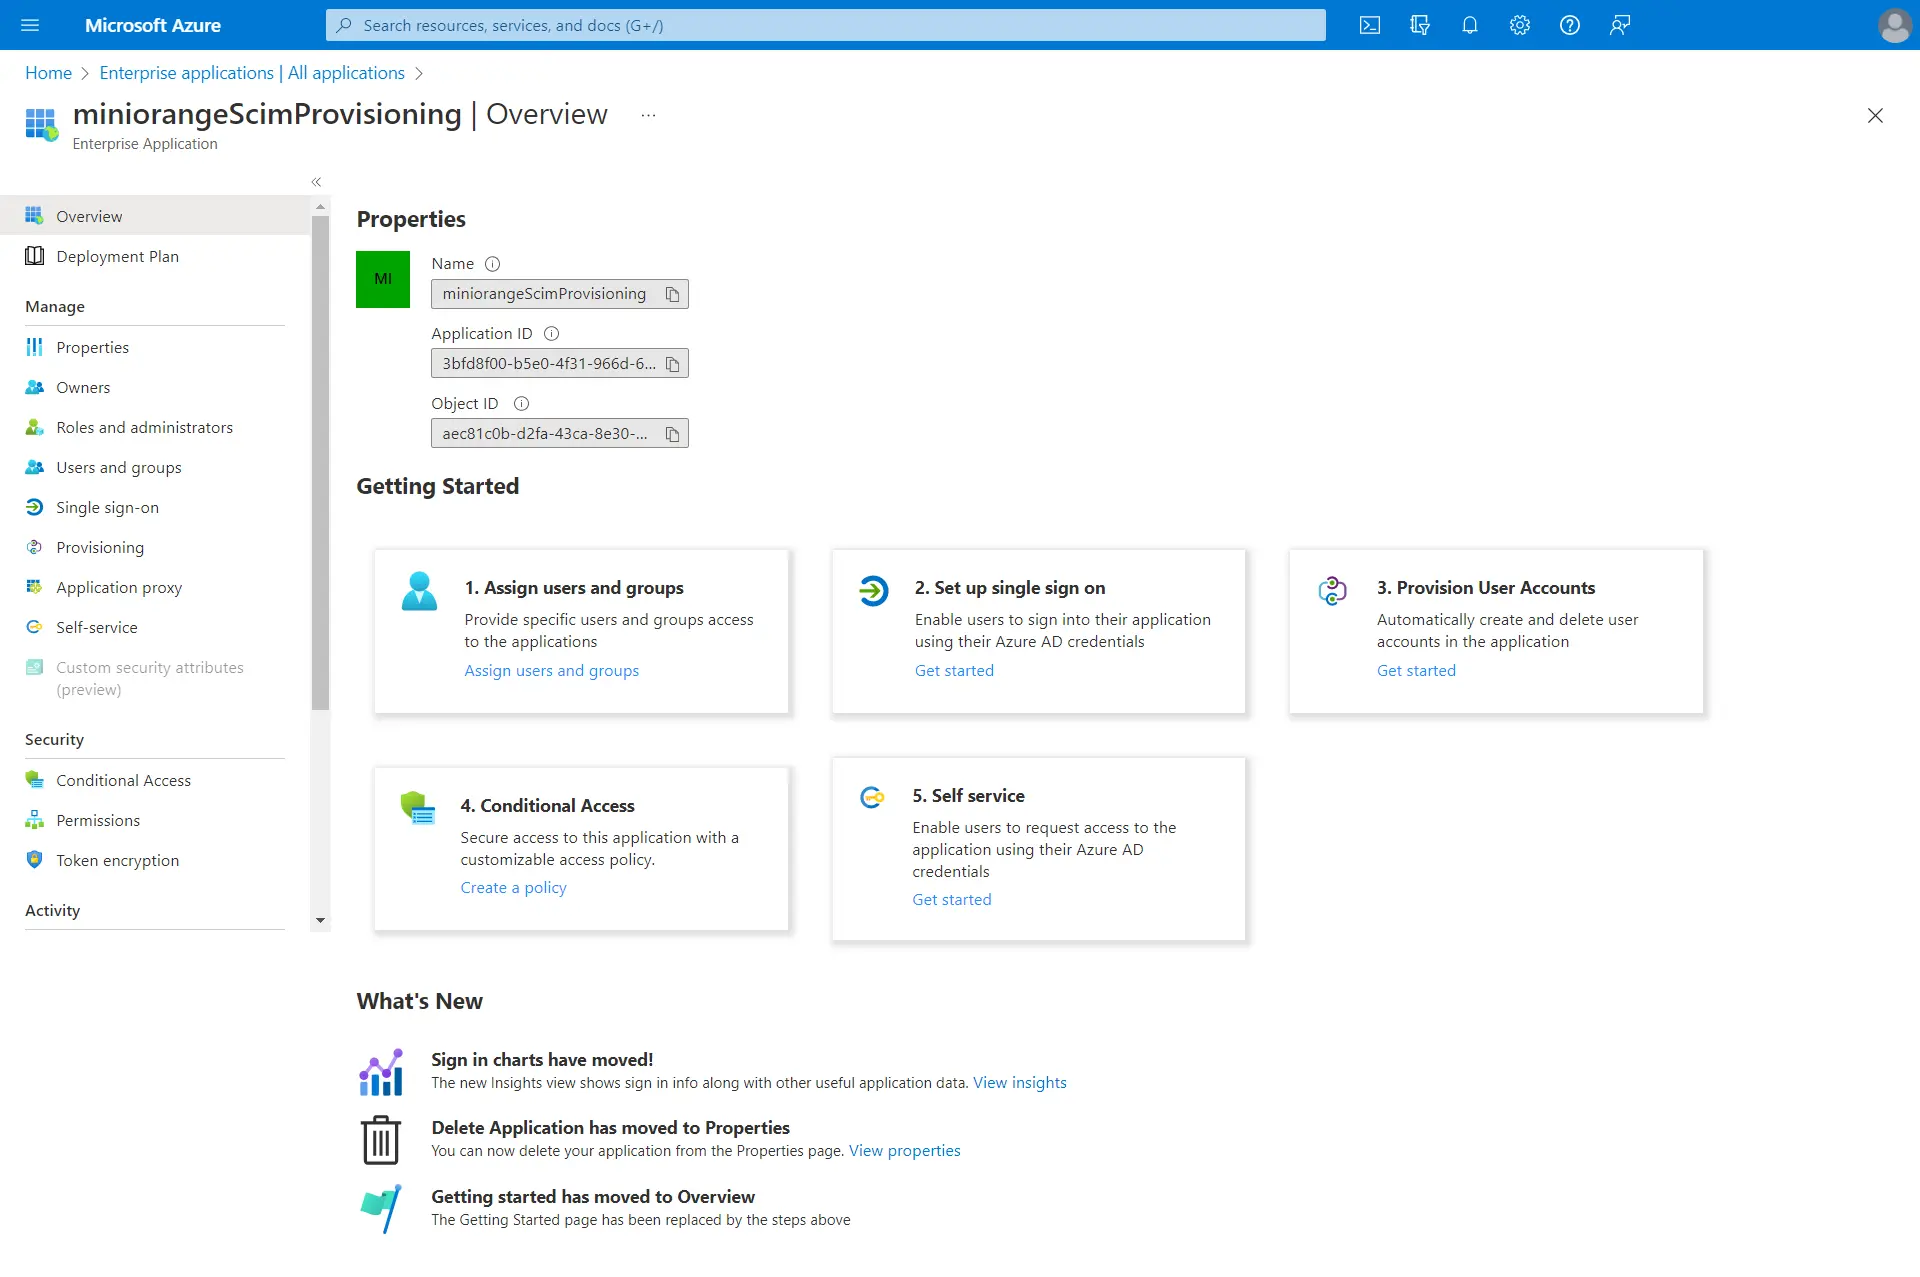 SCIM Provisioning with Azure AD: Select Provisioning